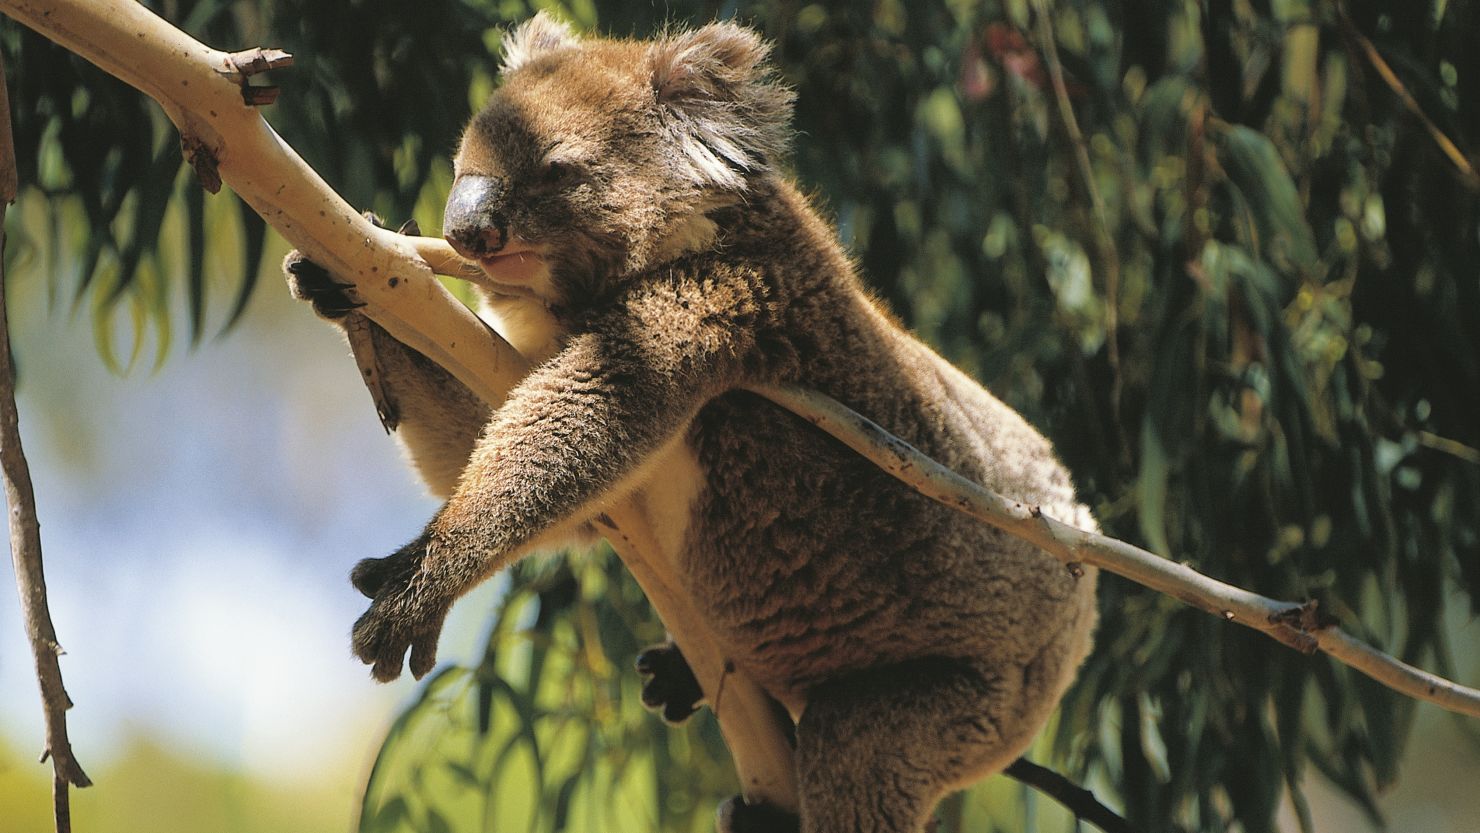 Chlamydia is rampant in the primary koala habitat in New South Wales and Queensland.